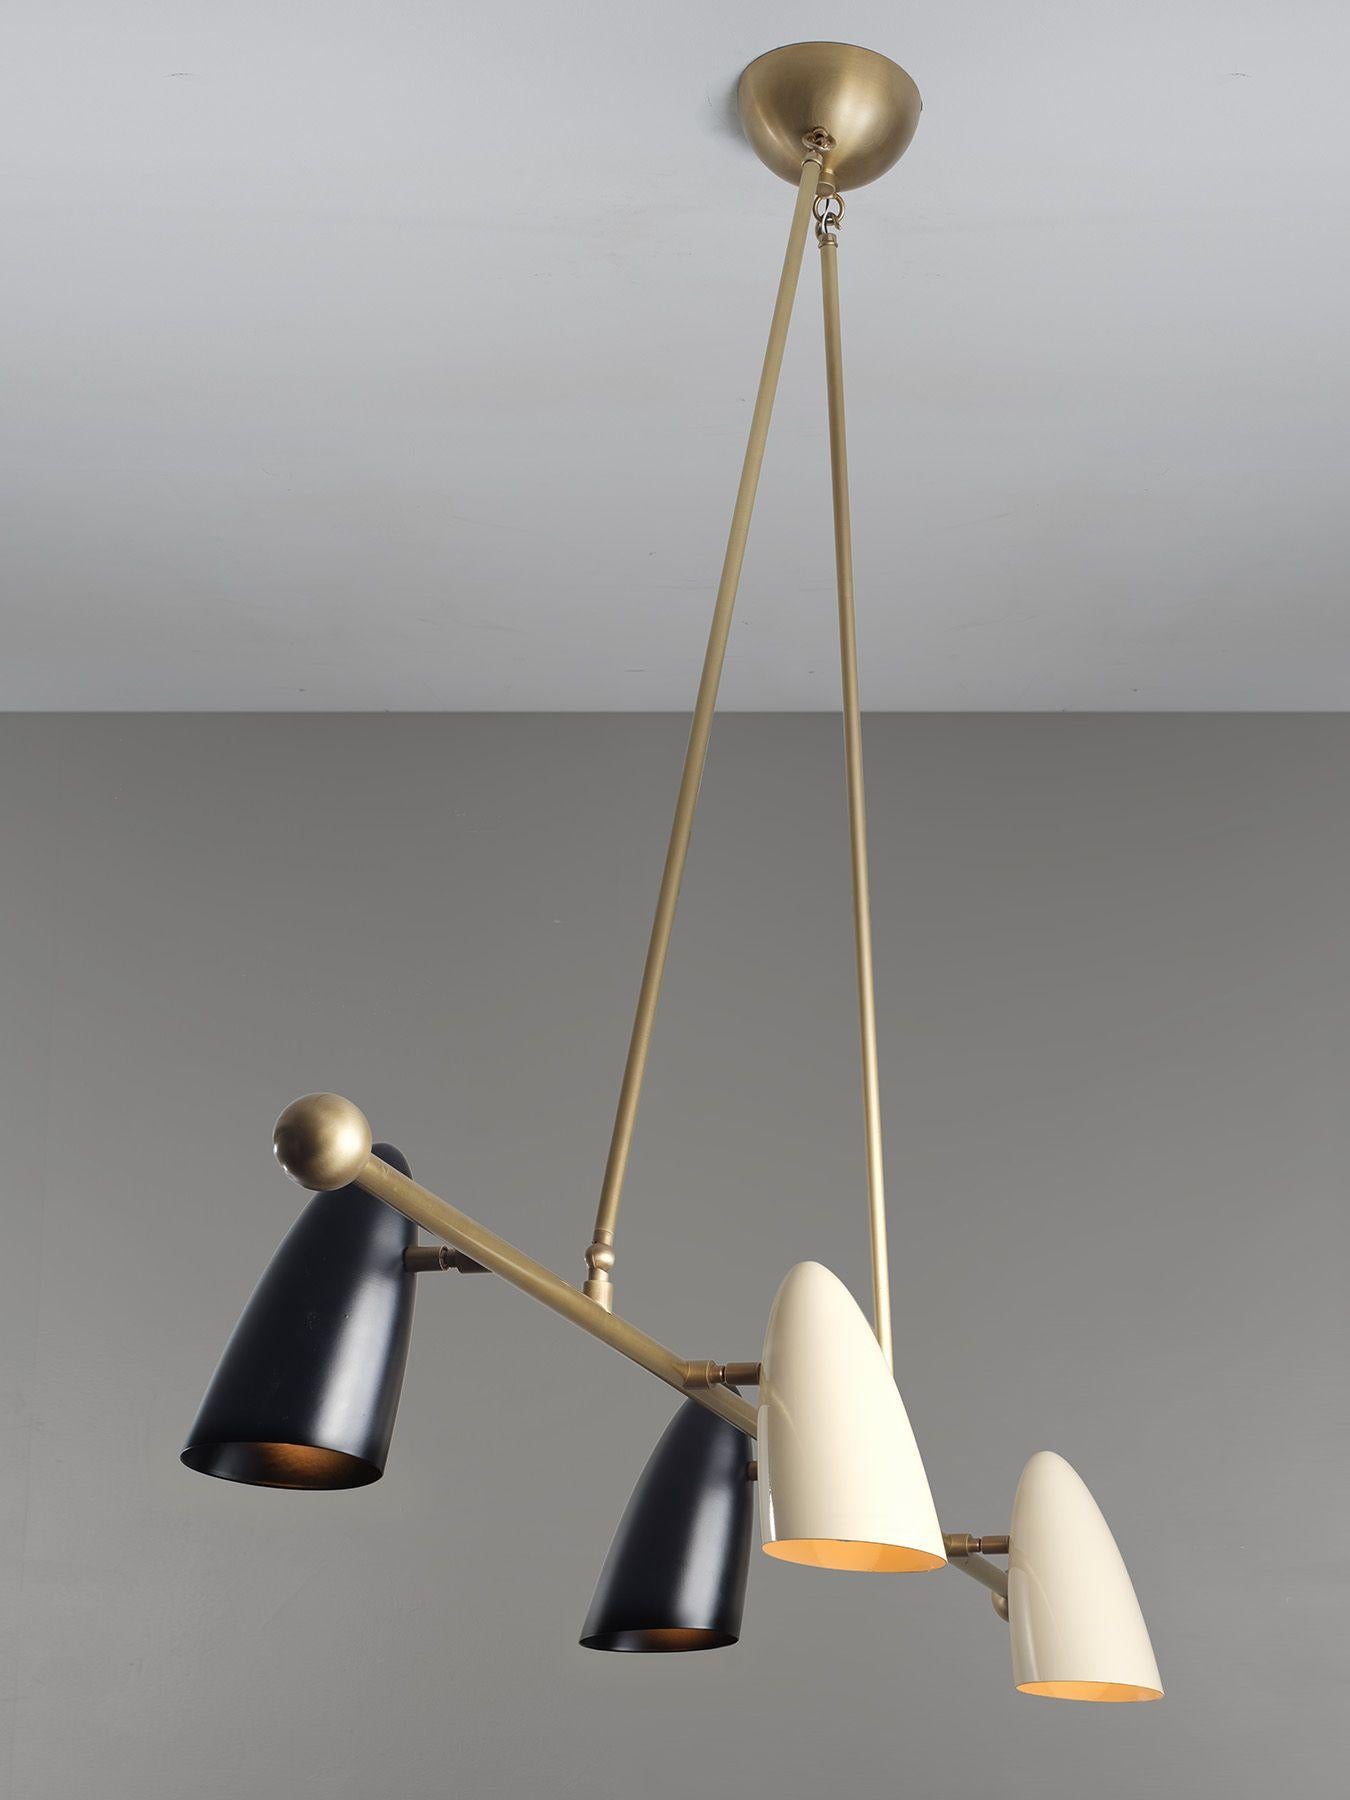 The CALYX ceiling fixture designed by Blueprint Lighting; a playful piece of functional sculpture inspired by the 